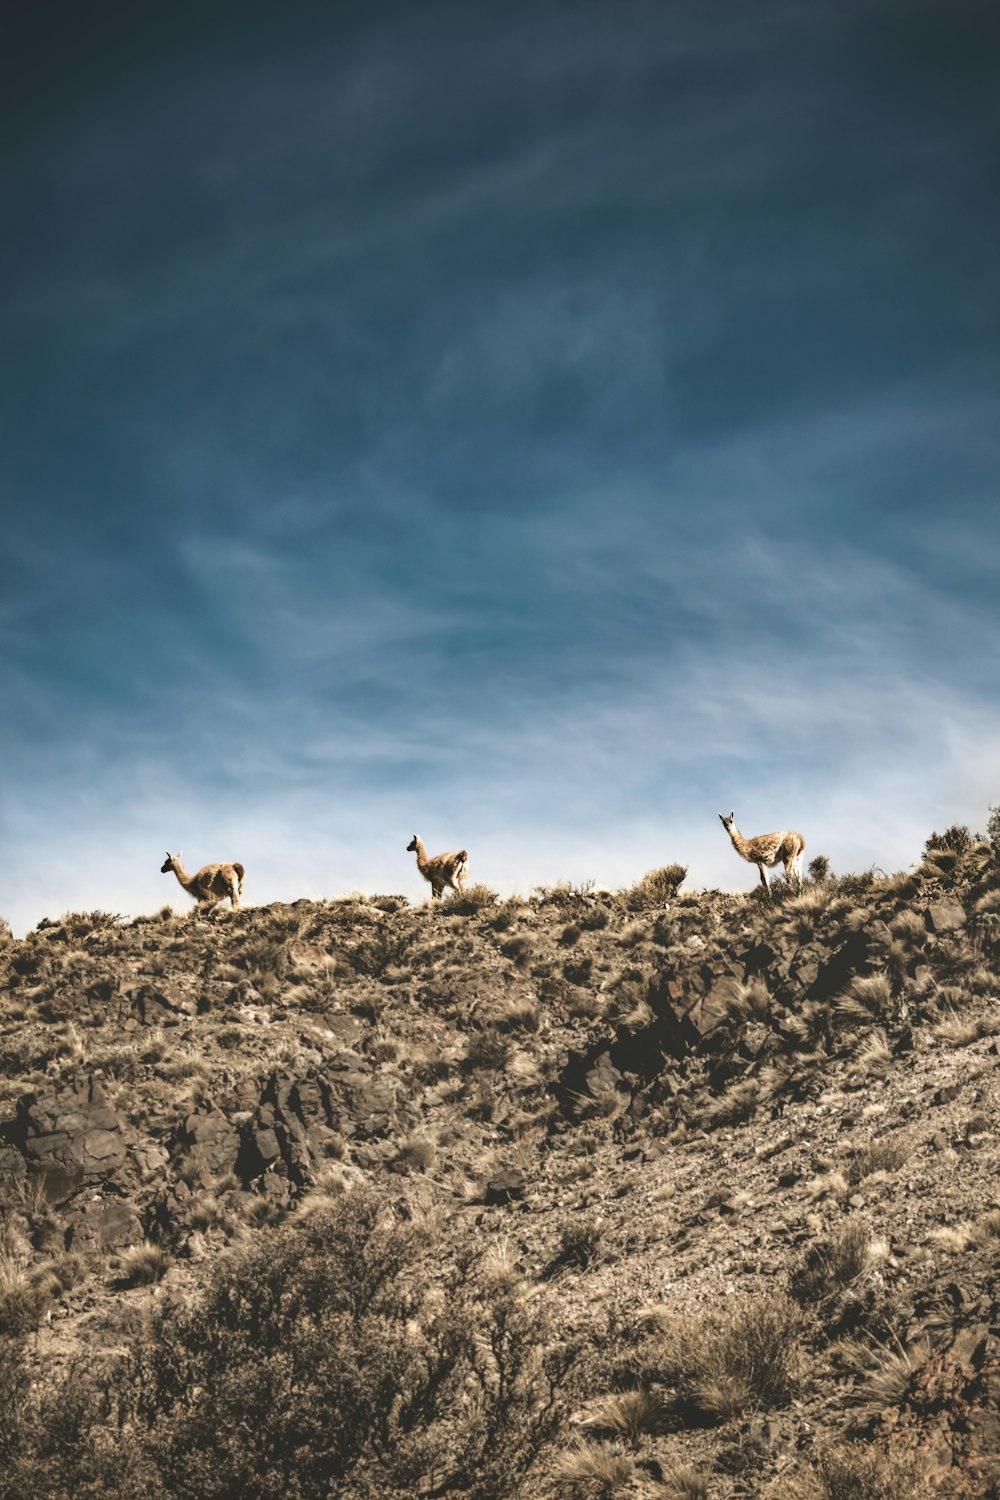 herd of goats on rocky hill under blue sky and white clouds during daytime